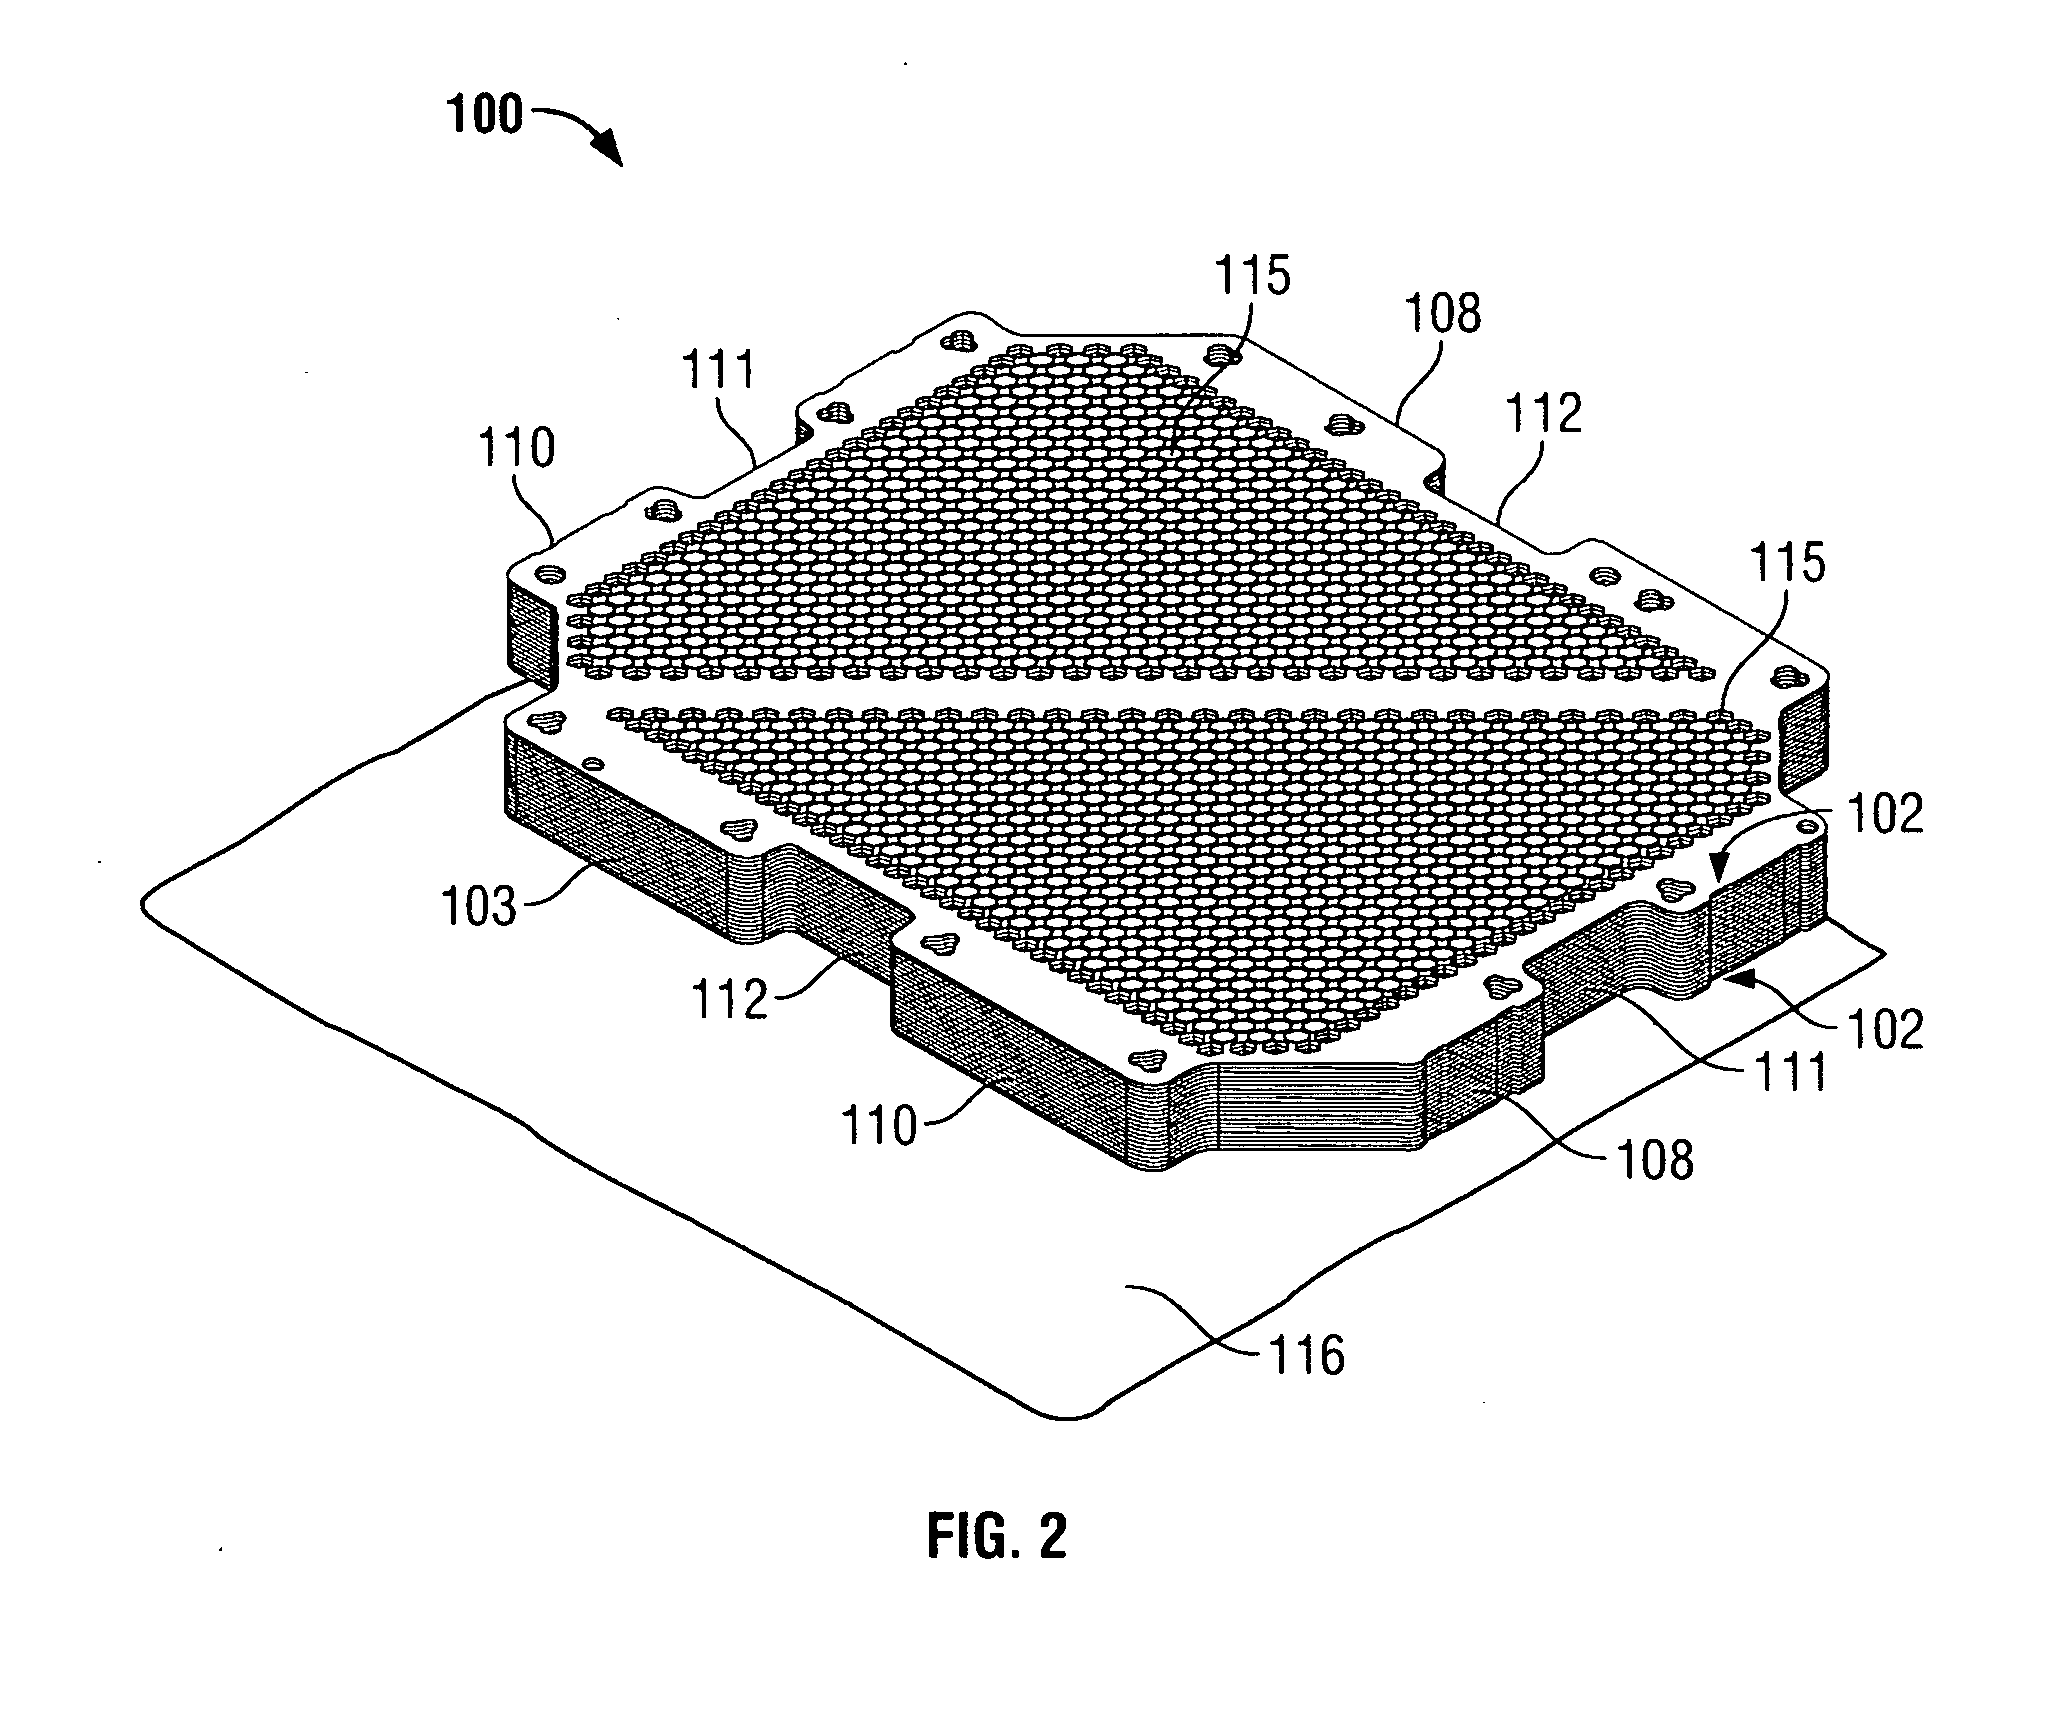 Bonded three dimensional metal laminate structure and method